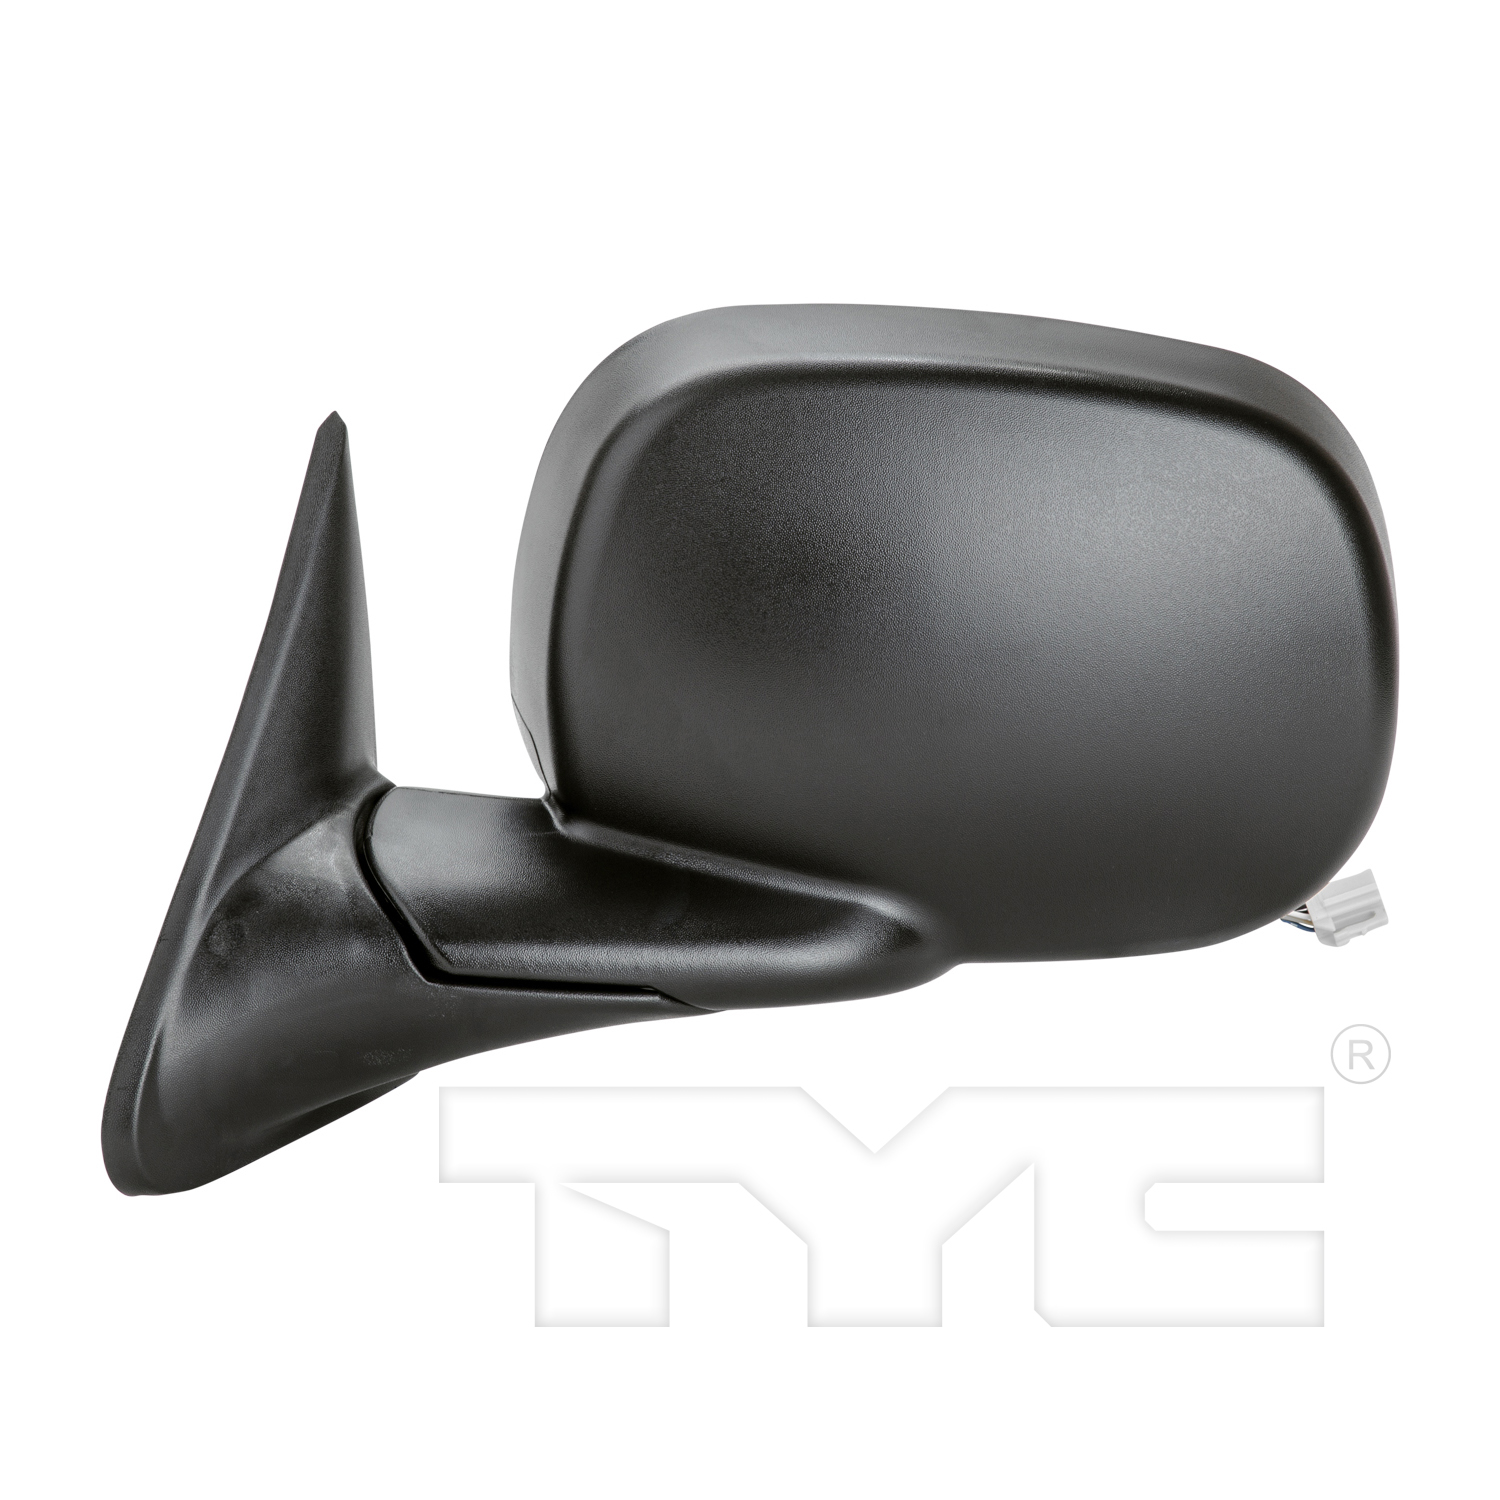 Aftermarket MIRRORS for DODGE - RAM 2500, RAM 2500,98-01,LT Mirror outside rear view